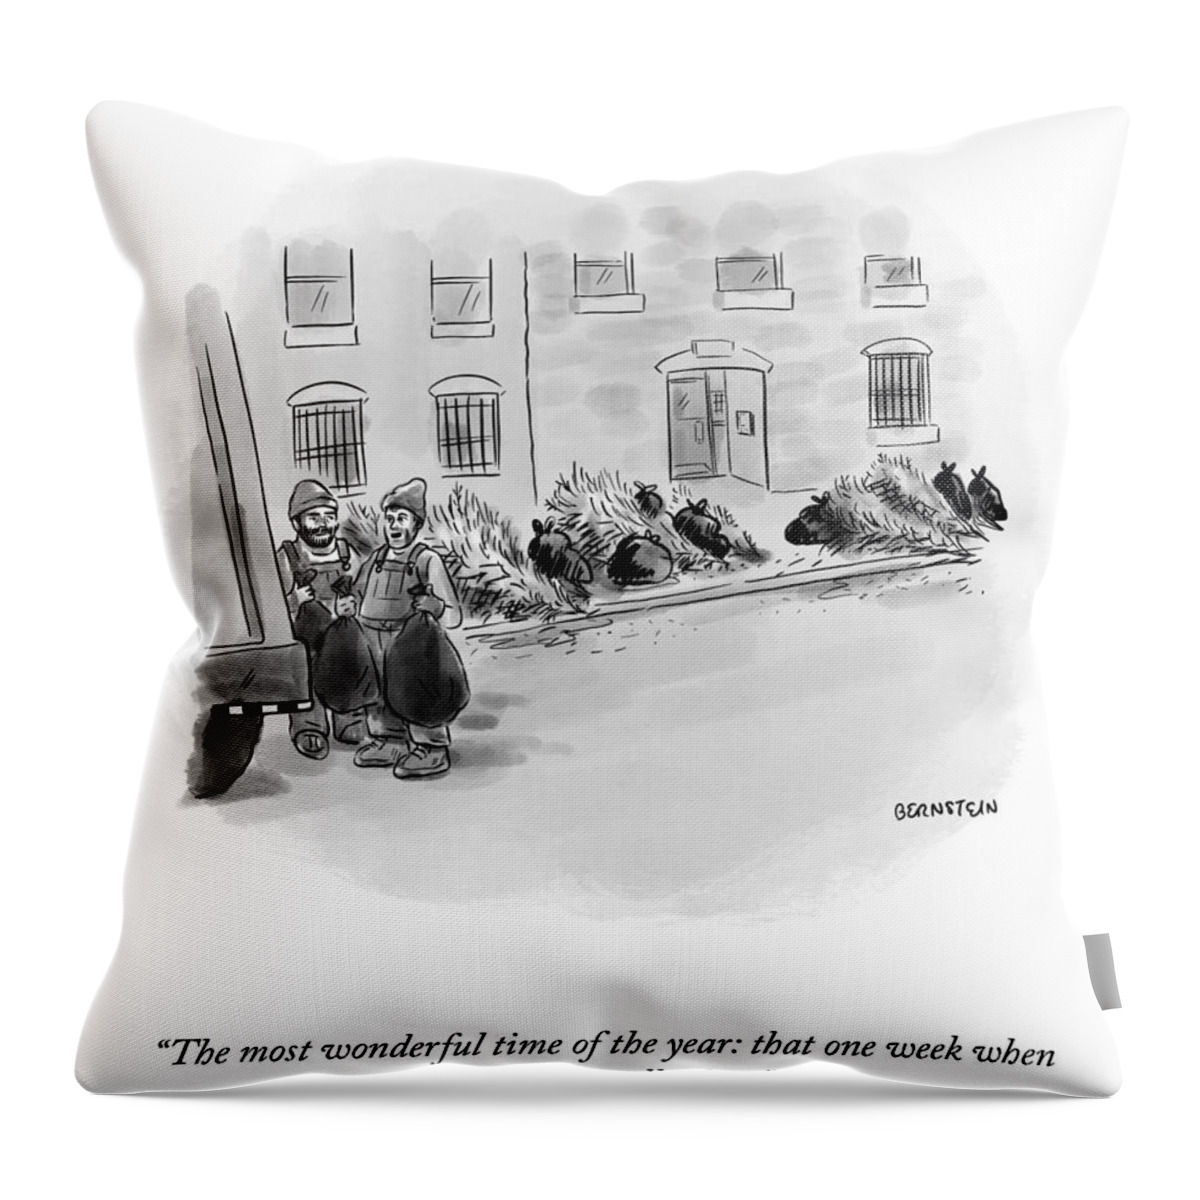 The Most Wonderful Time Of The Year Throw Pillow